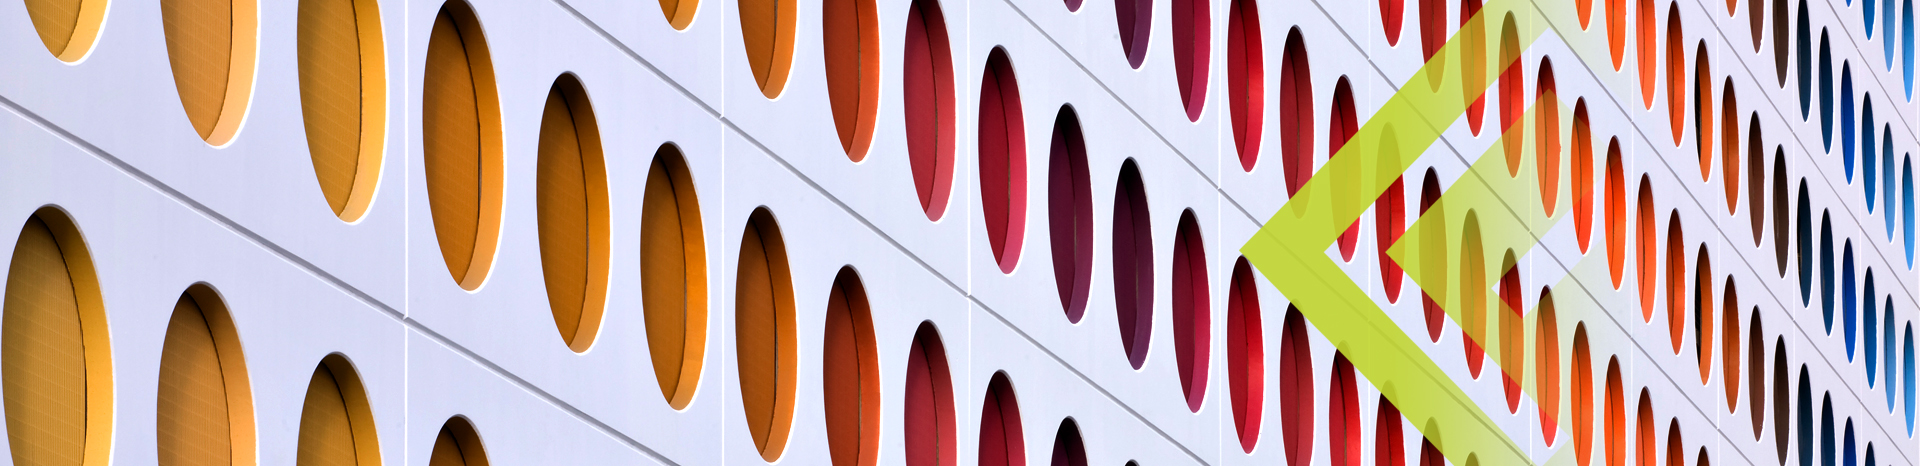 an abstract image showing the side of a silver building with an interesting design created by different coloured circles carved into the wall